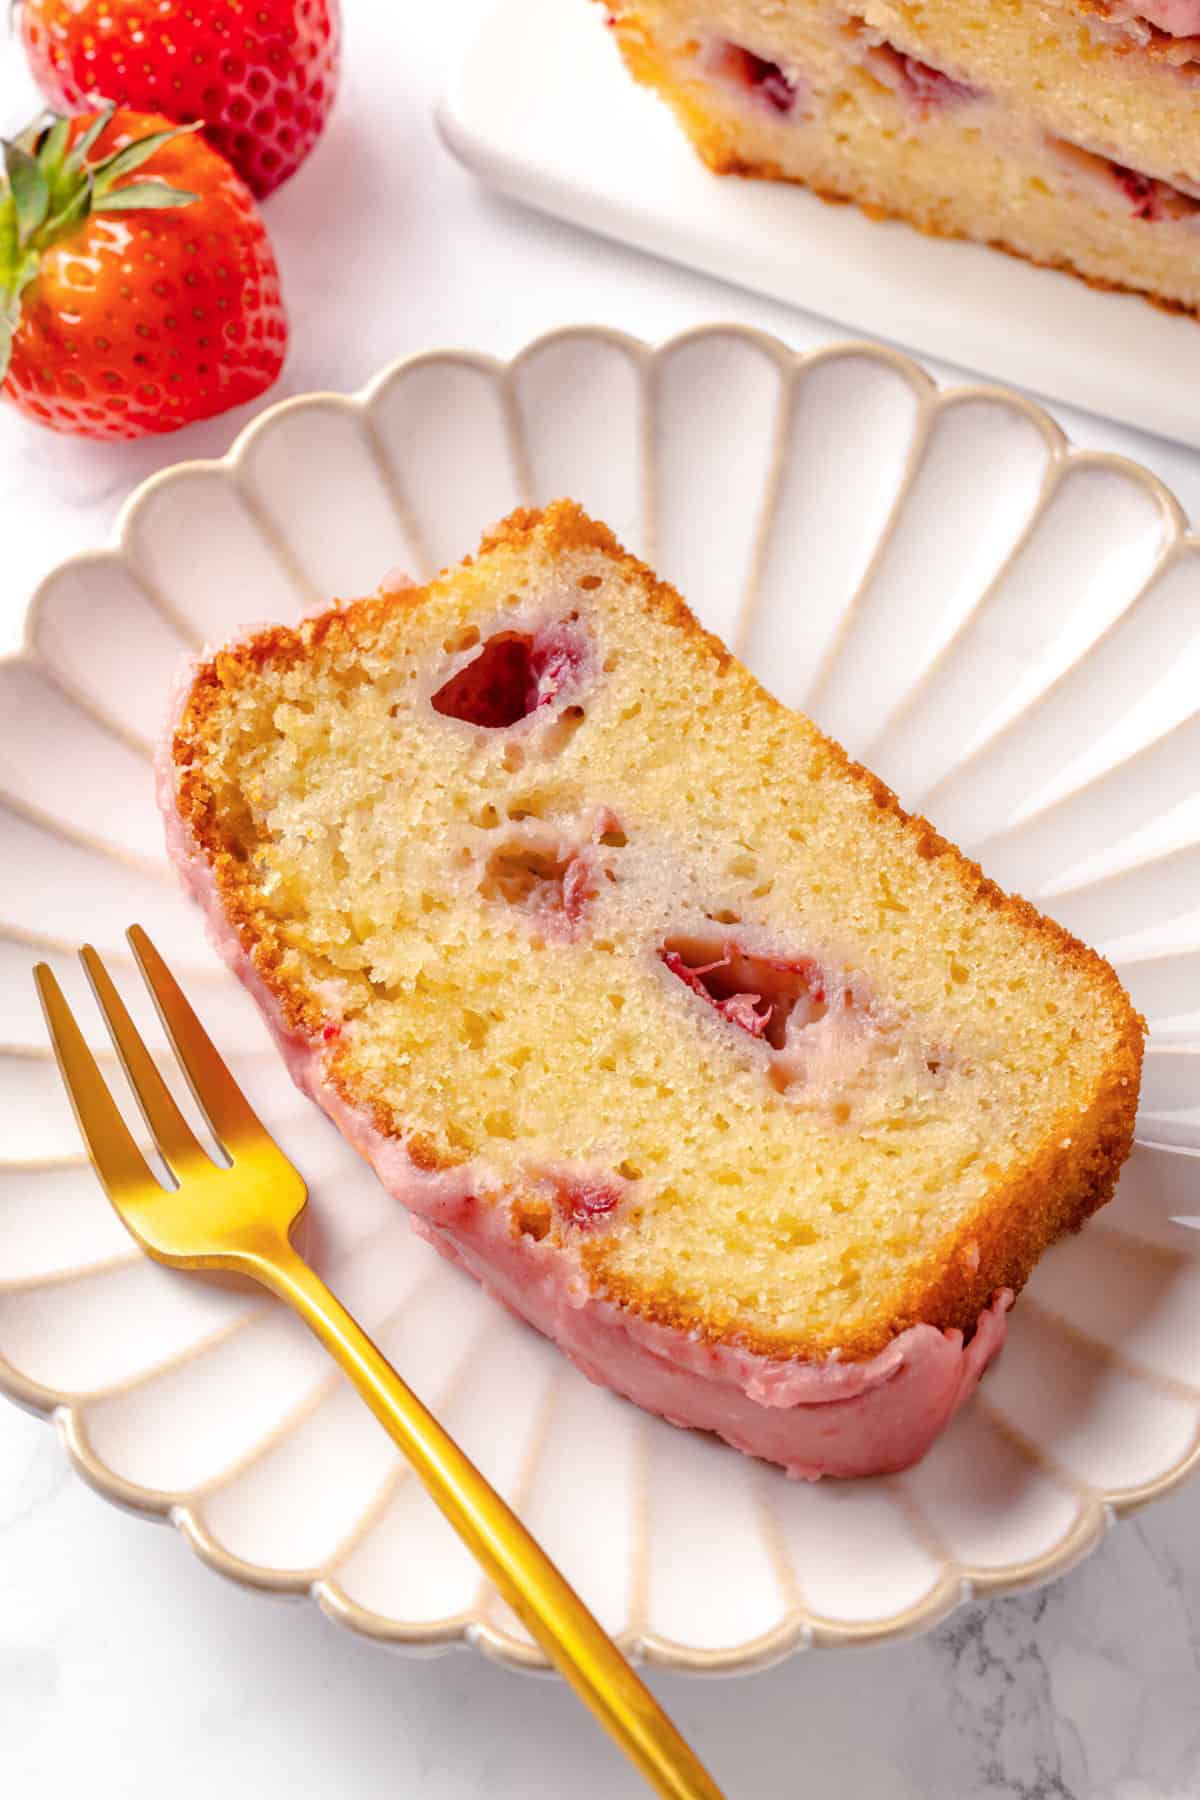 Slice of strawberry poundcake served on a scalloped pink plate with a gold fork.